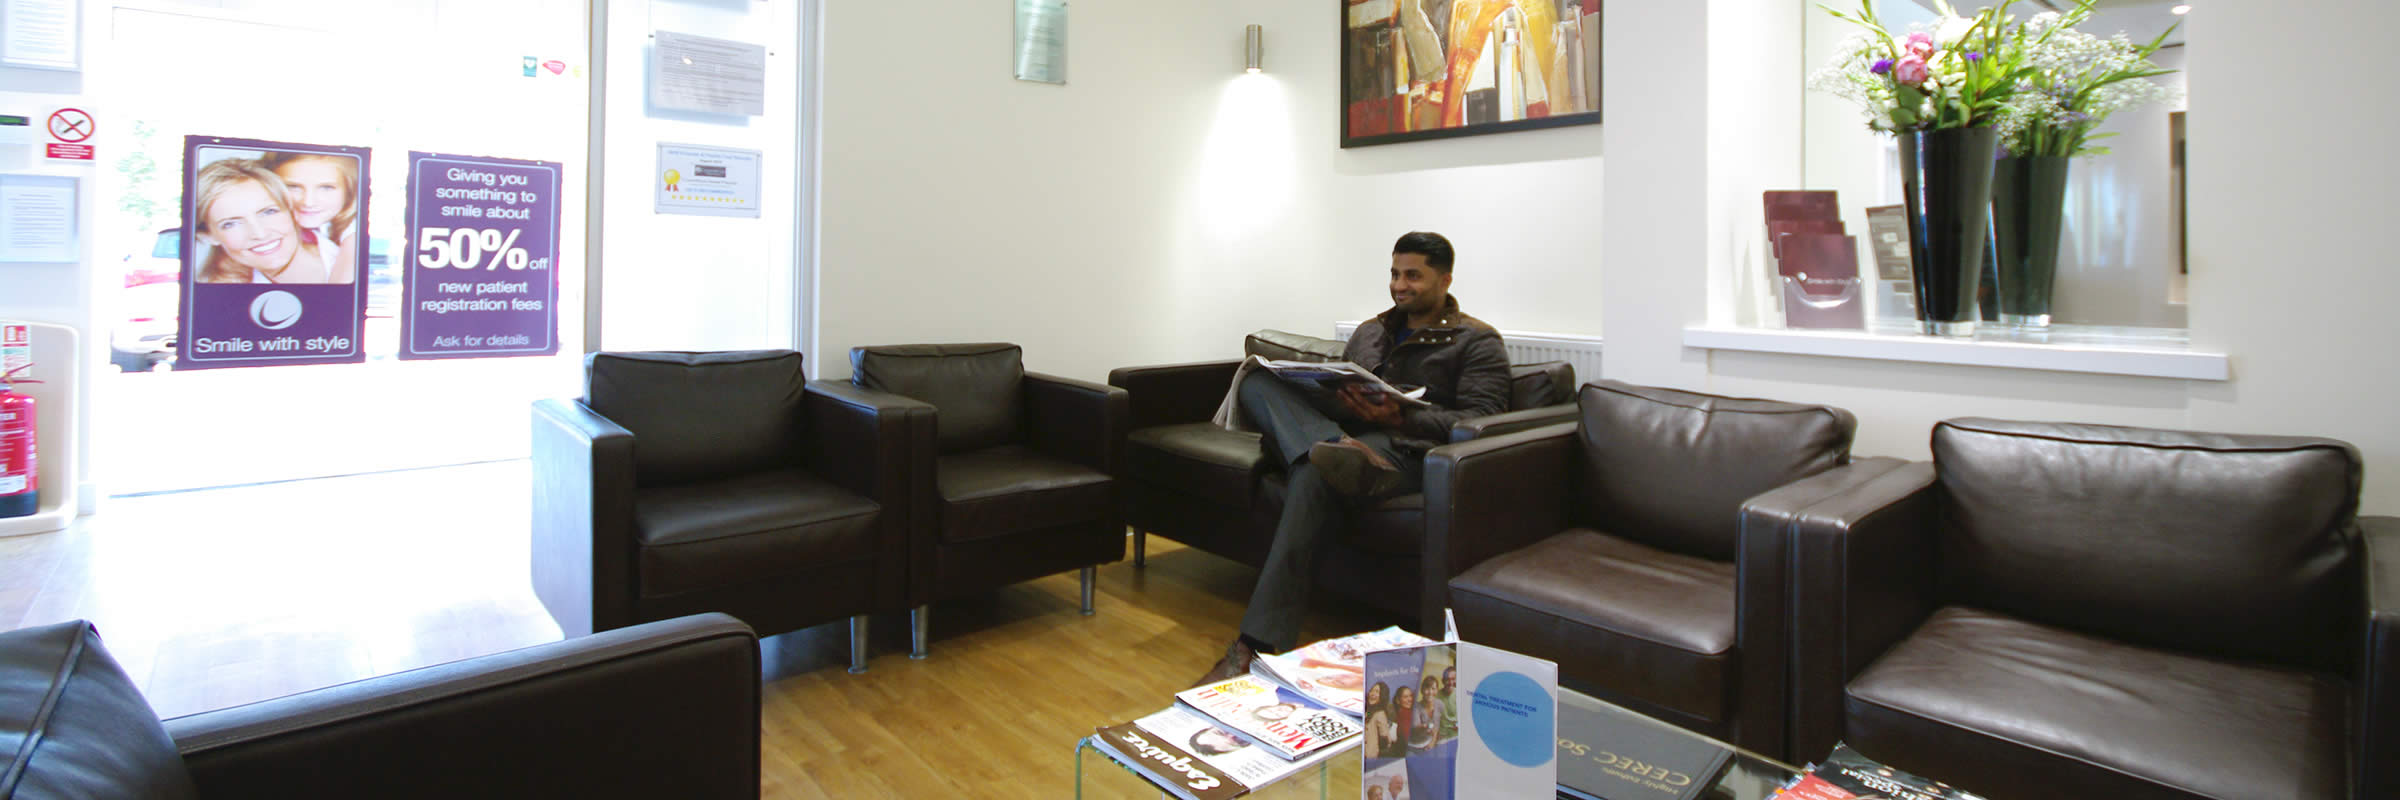 New Patients Welcome at CrownWood Dental Practice in Bracknell